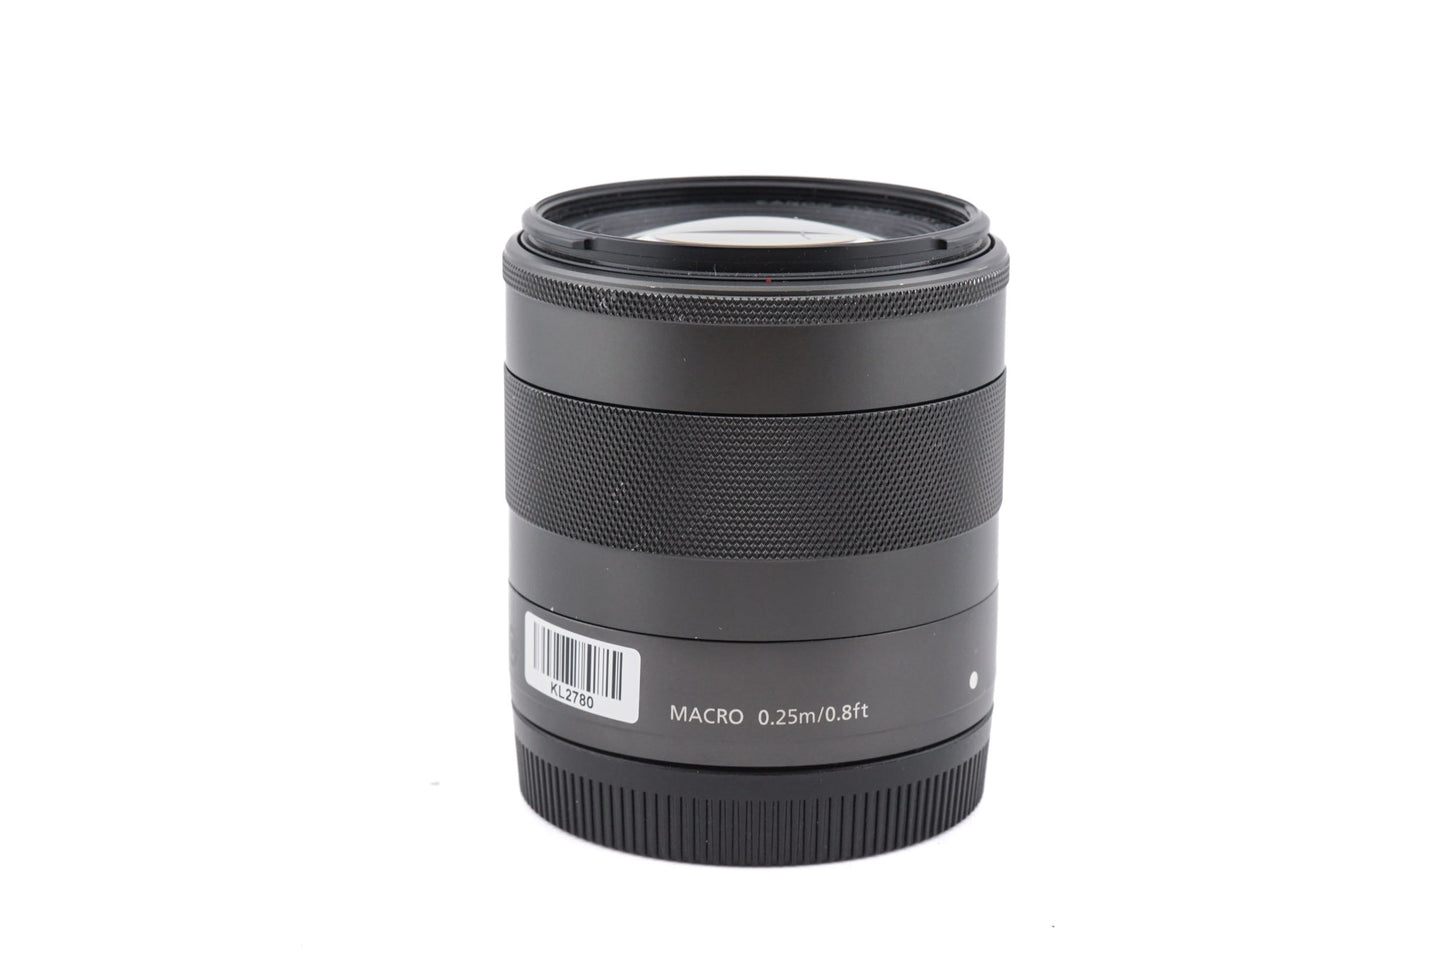 Canon 18-55mm f3.5-5.6 IS STM